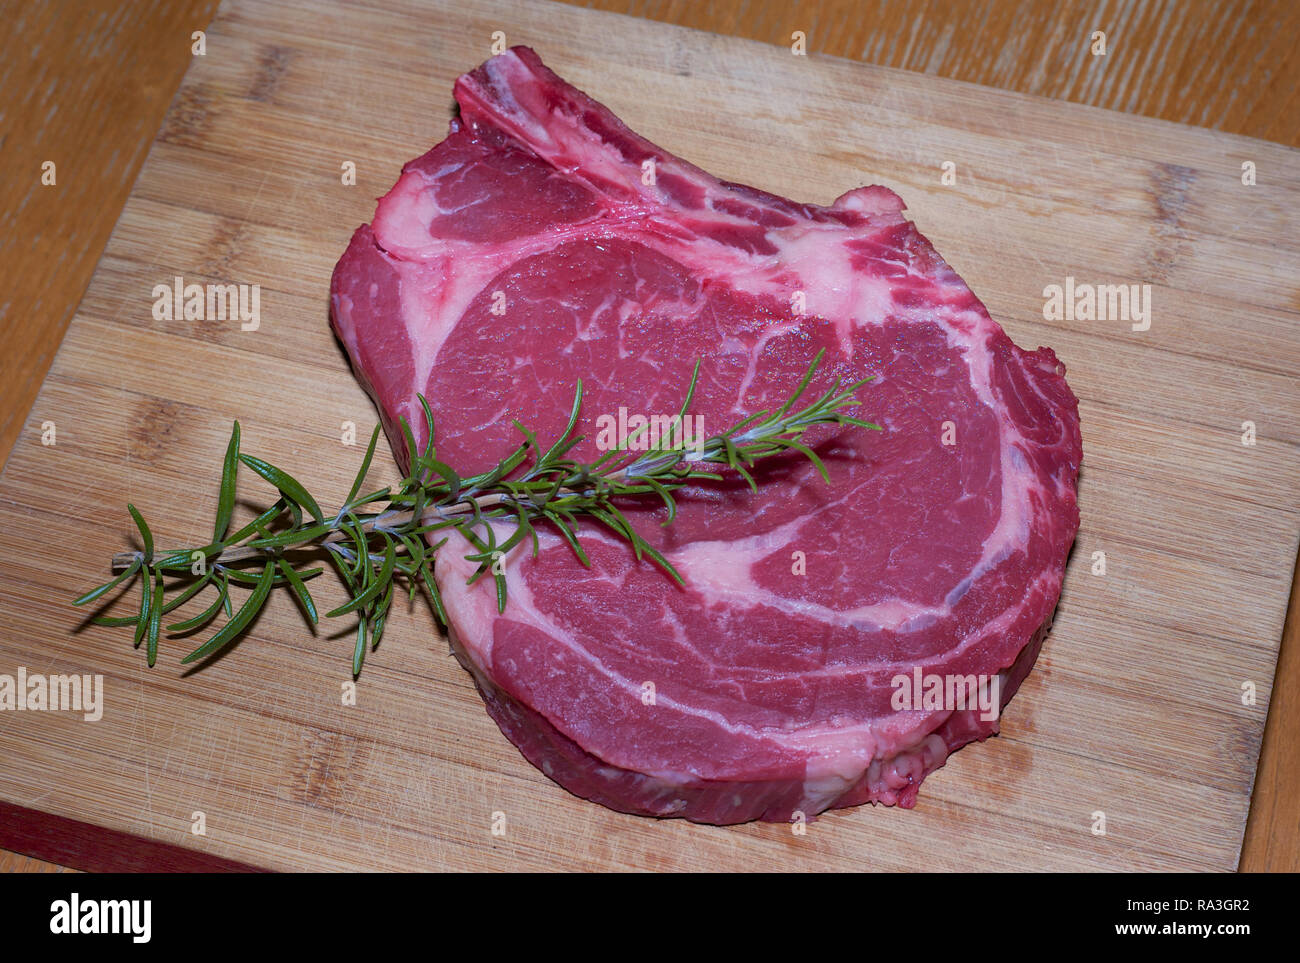 Raw Prime Rib of Beef on a Wooden Board Stock Photo